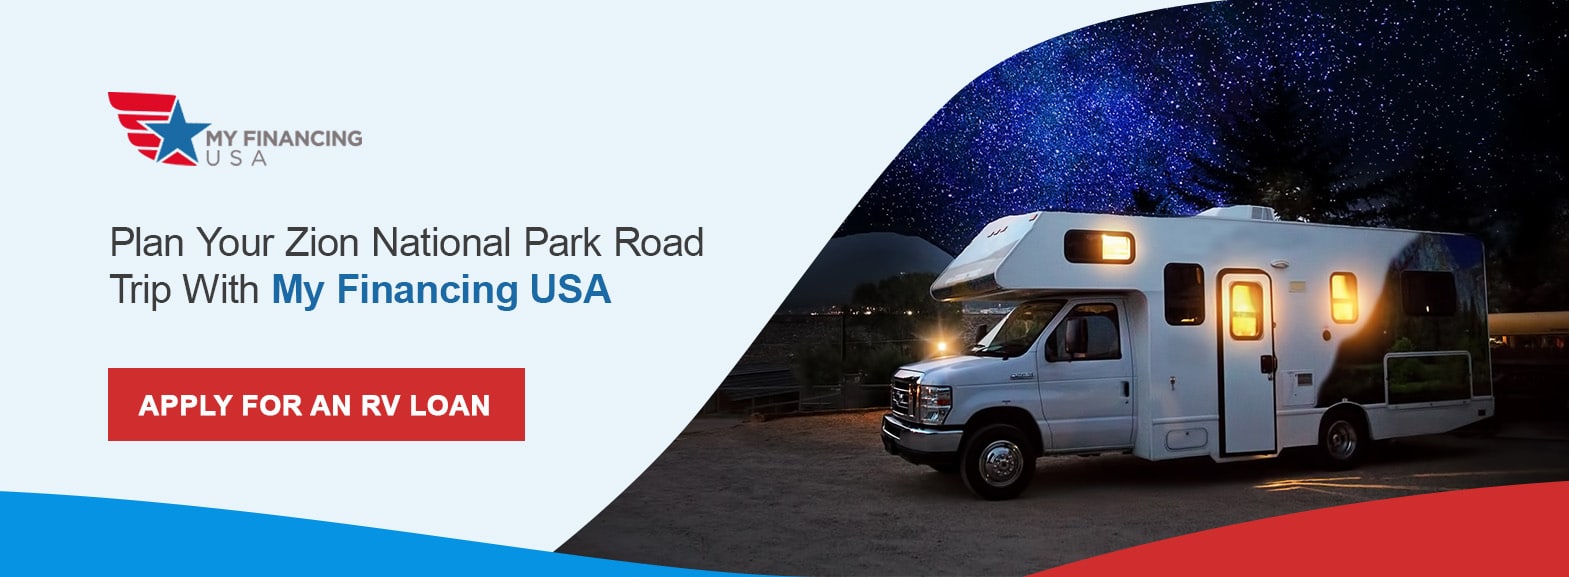 Plan Your Zion National Park Road Trip With My Financing USA. Apply for an RV loan!